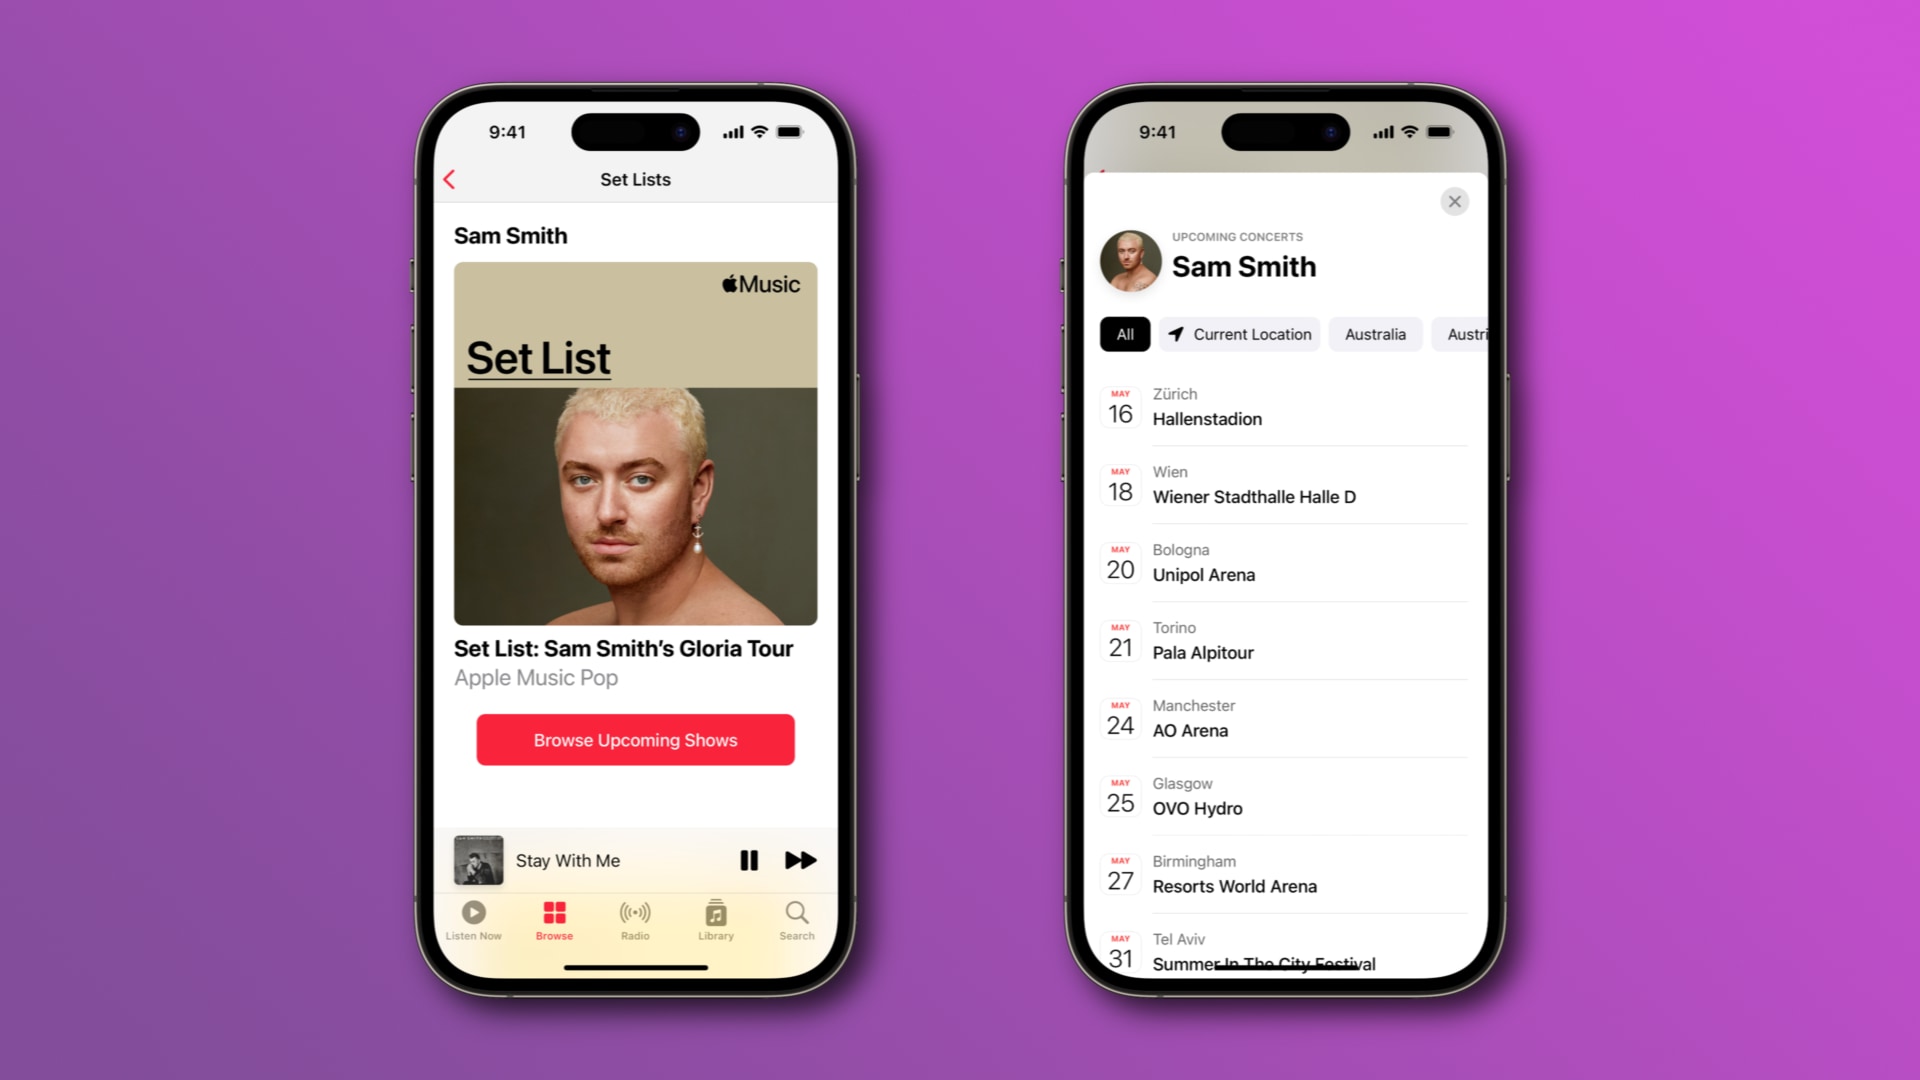 Set list and tour dates for Sam Smith's live concerts in the Music app on iPhone